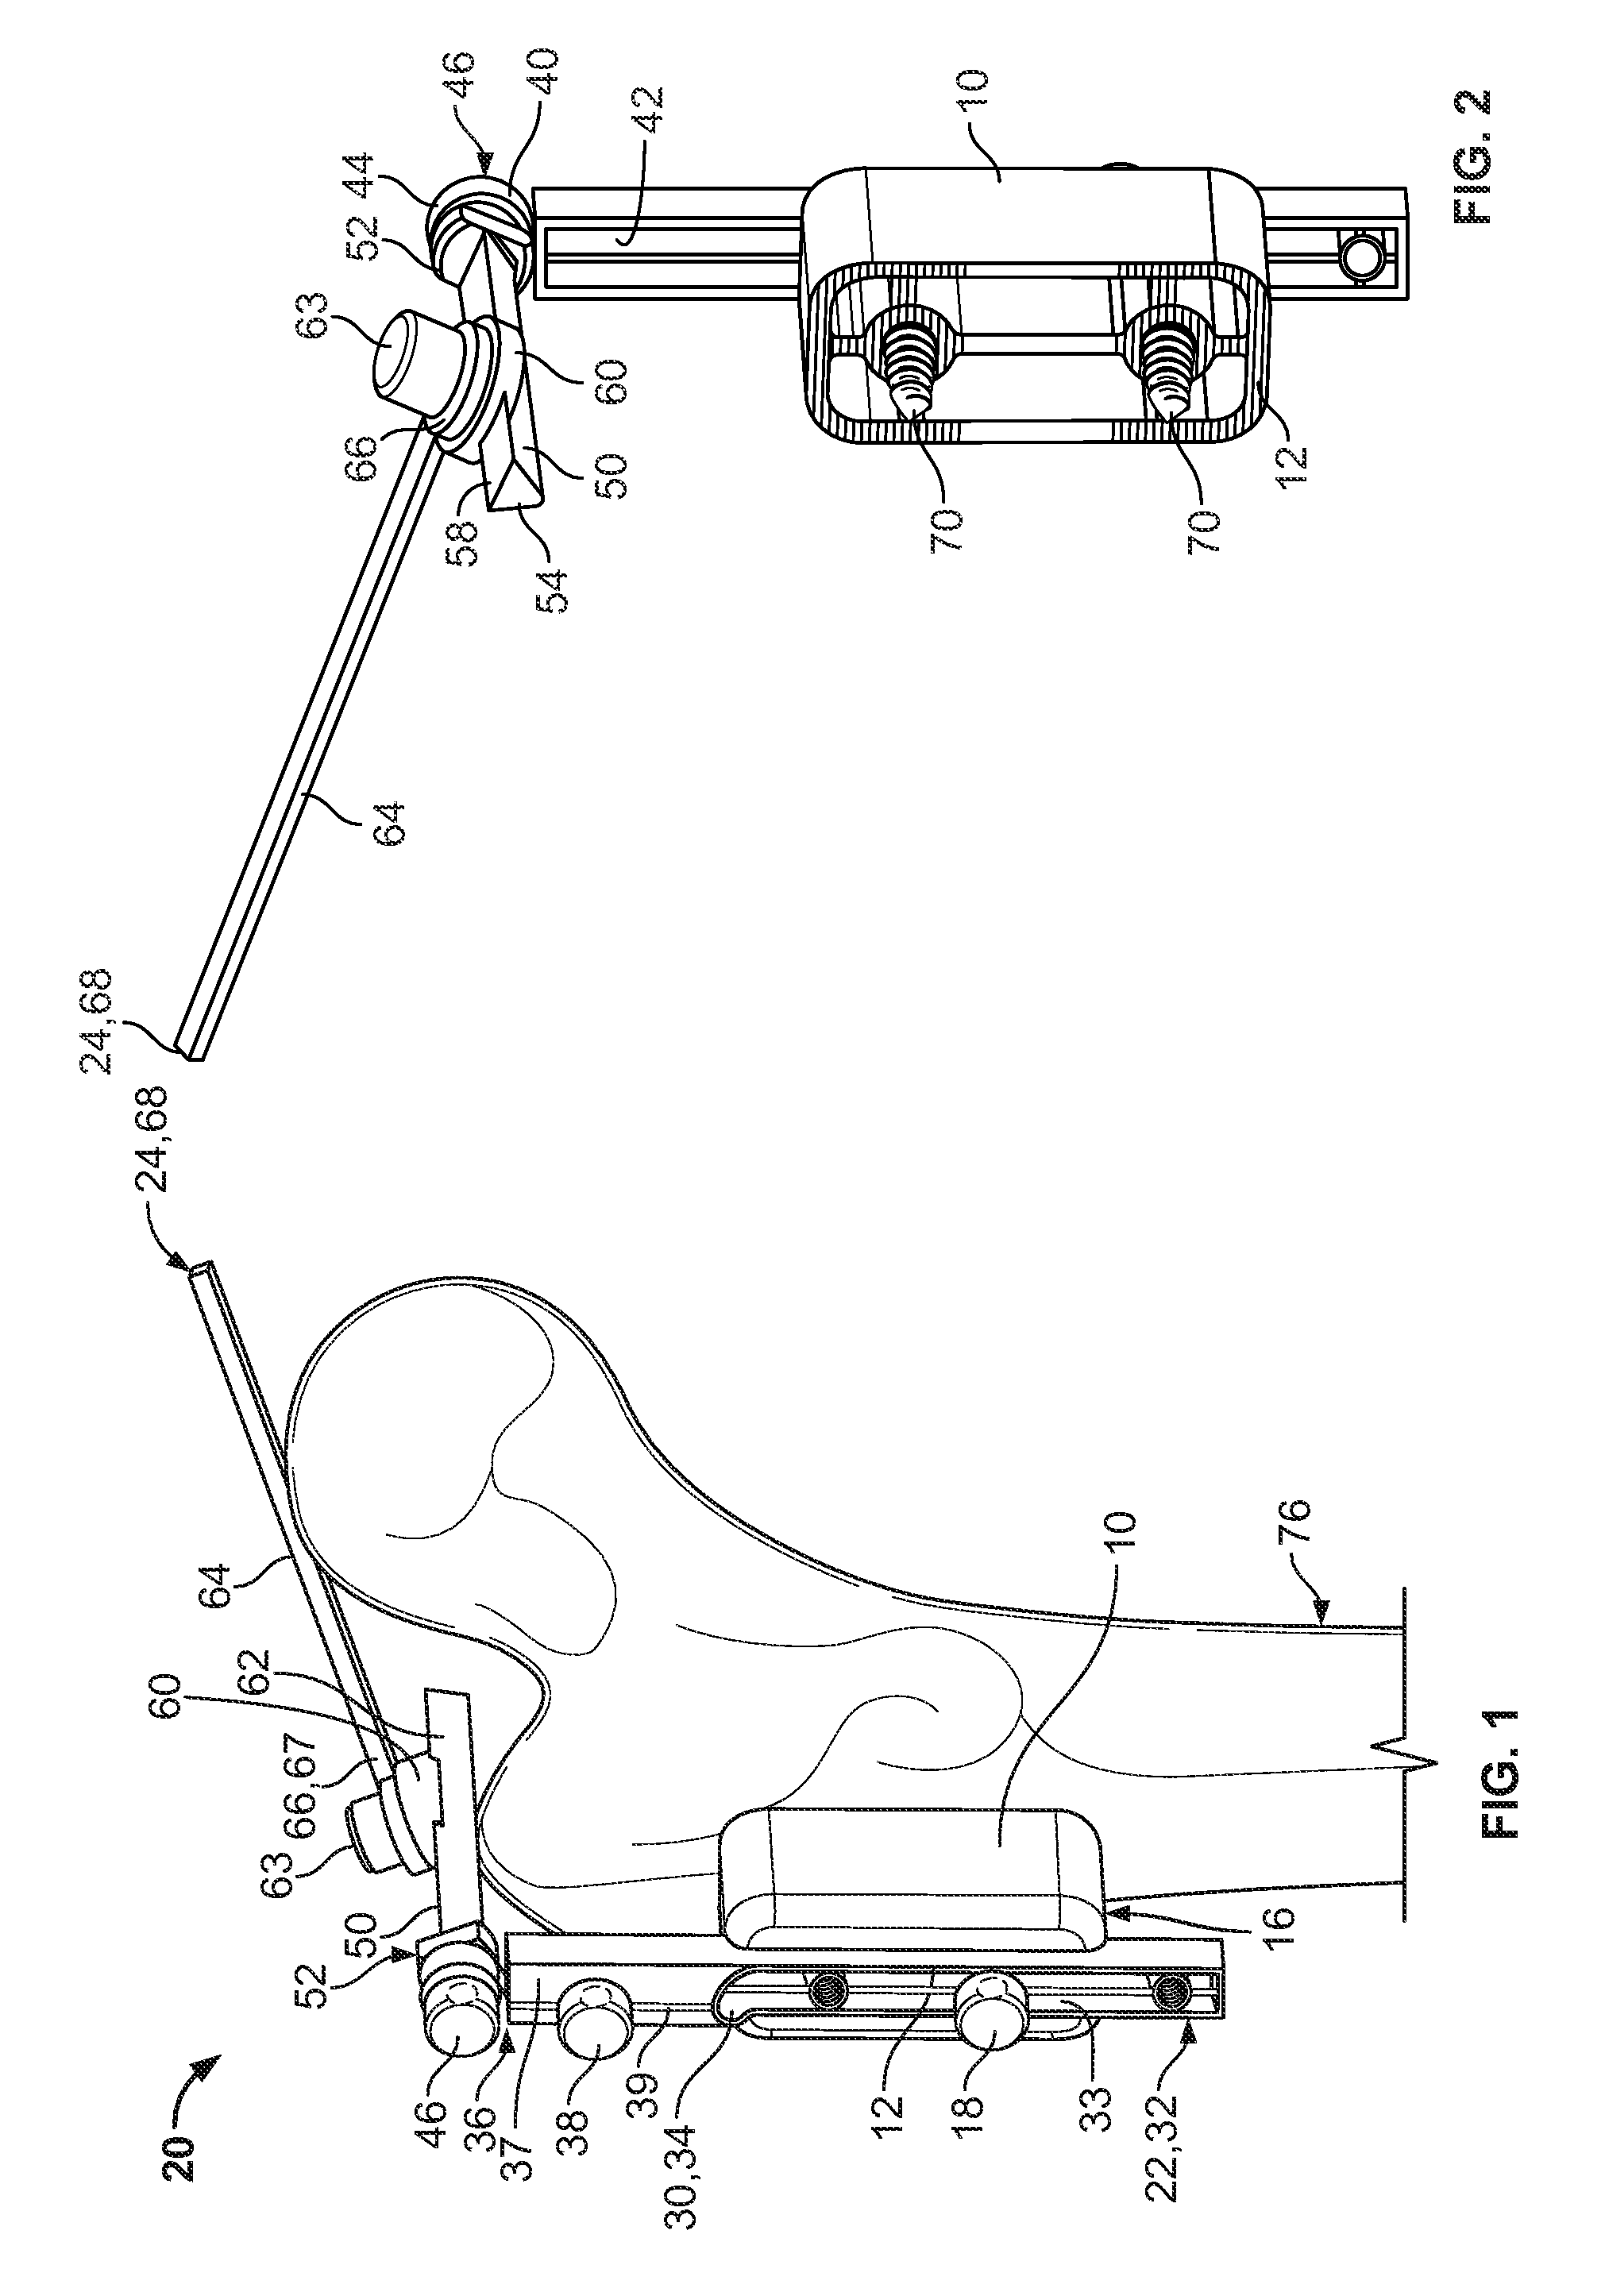 Native version alignment devices and methods